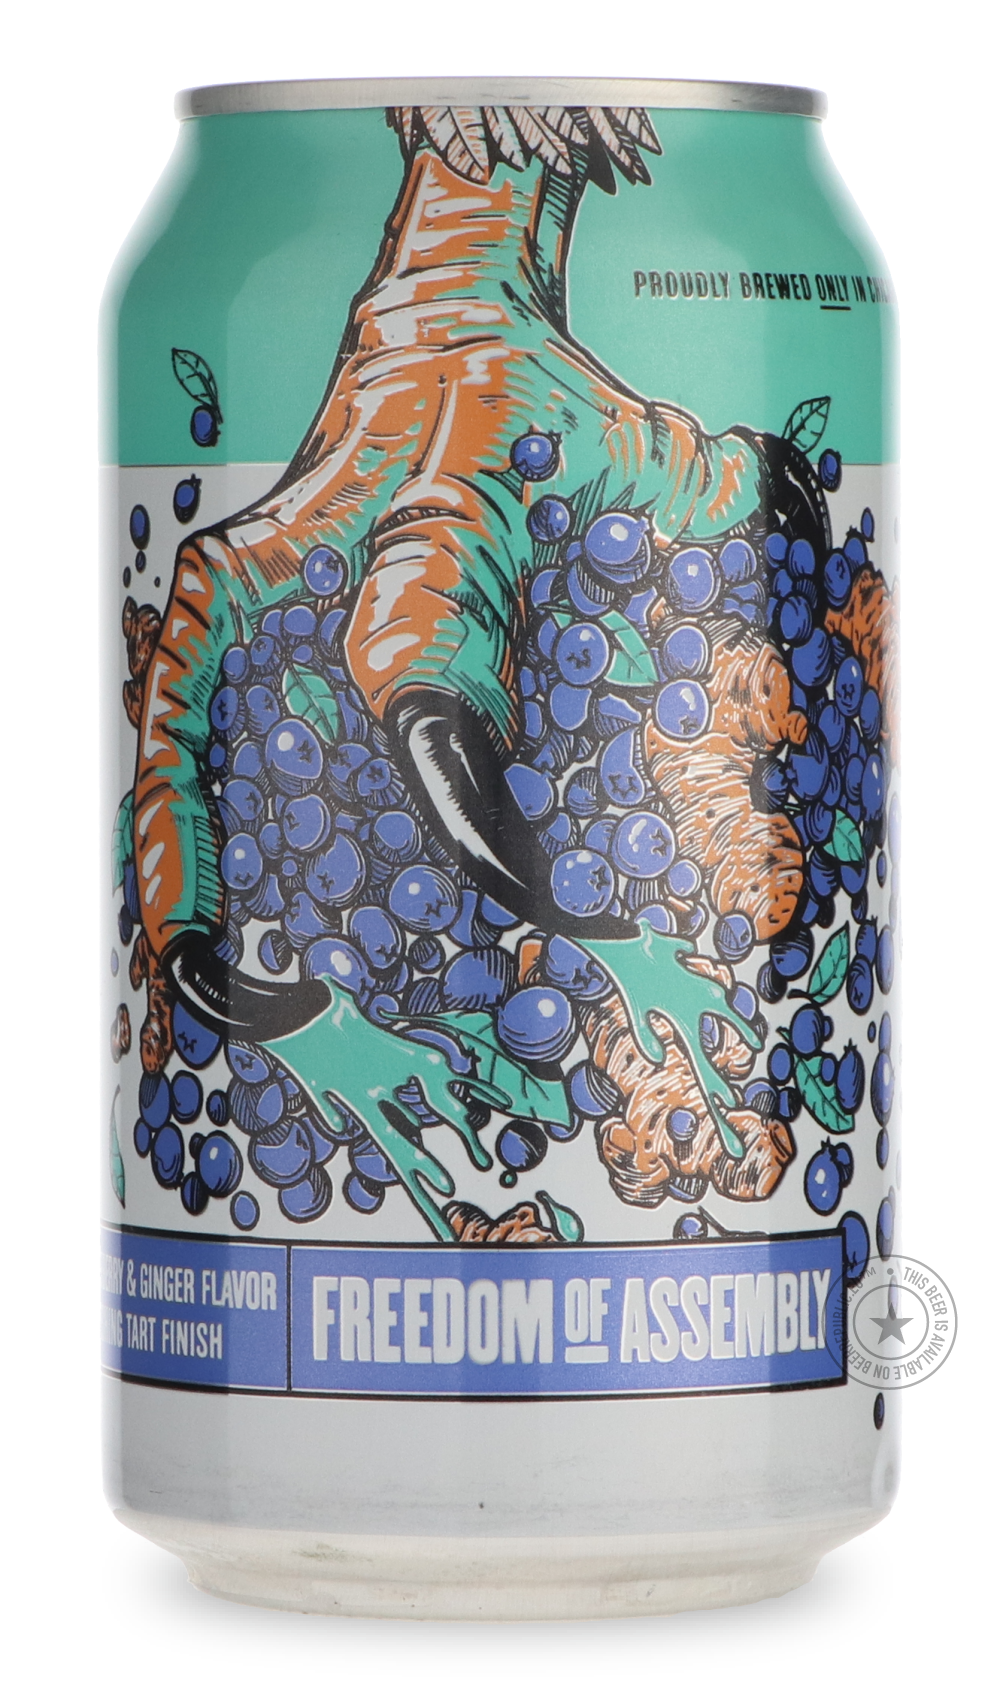 -Revolution- Freedom of Assembly-Sour / Wild & Fruity- Only @ Beer Republic - The best online beer store for American & Canadian craft beer - Buy beer online from the USA and Canada - Bier online kopen - Amerikaans bier kopen - Craft beer store - Craft beer kopen - Amerikanisch bier kaufen - Bier online kaufen - Acheter biere online - IPA - Stout - Porter - New England IPA - Hazy IPA - Imperial Stout - Barrel Aged - Barrel Aged Imperial Stout - Brown - Dark beer - Blond - Blonde - Pilsner - Lager - Wheat - 